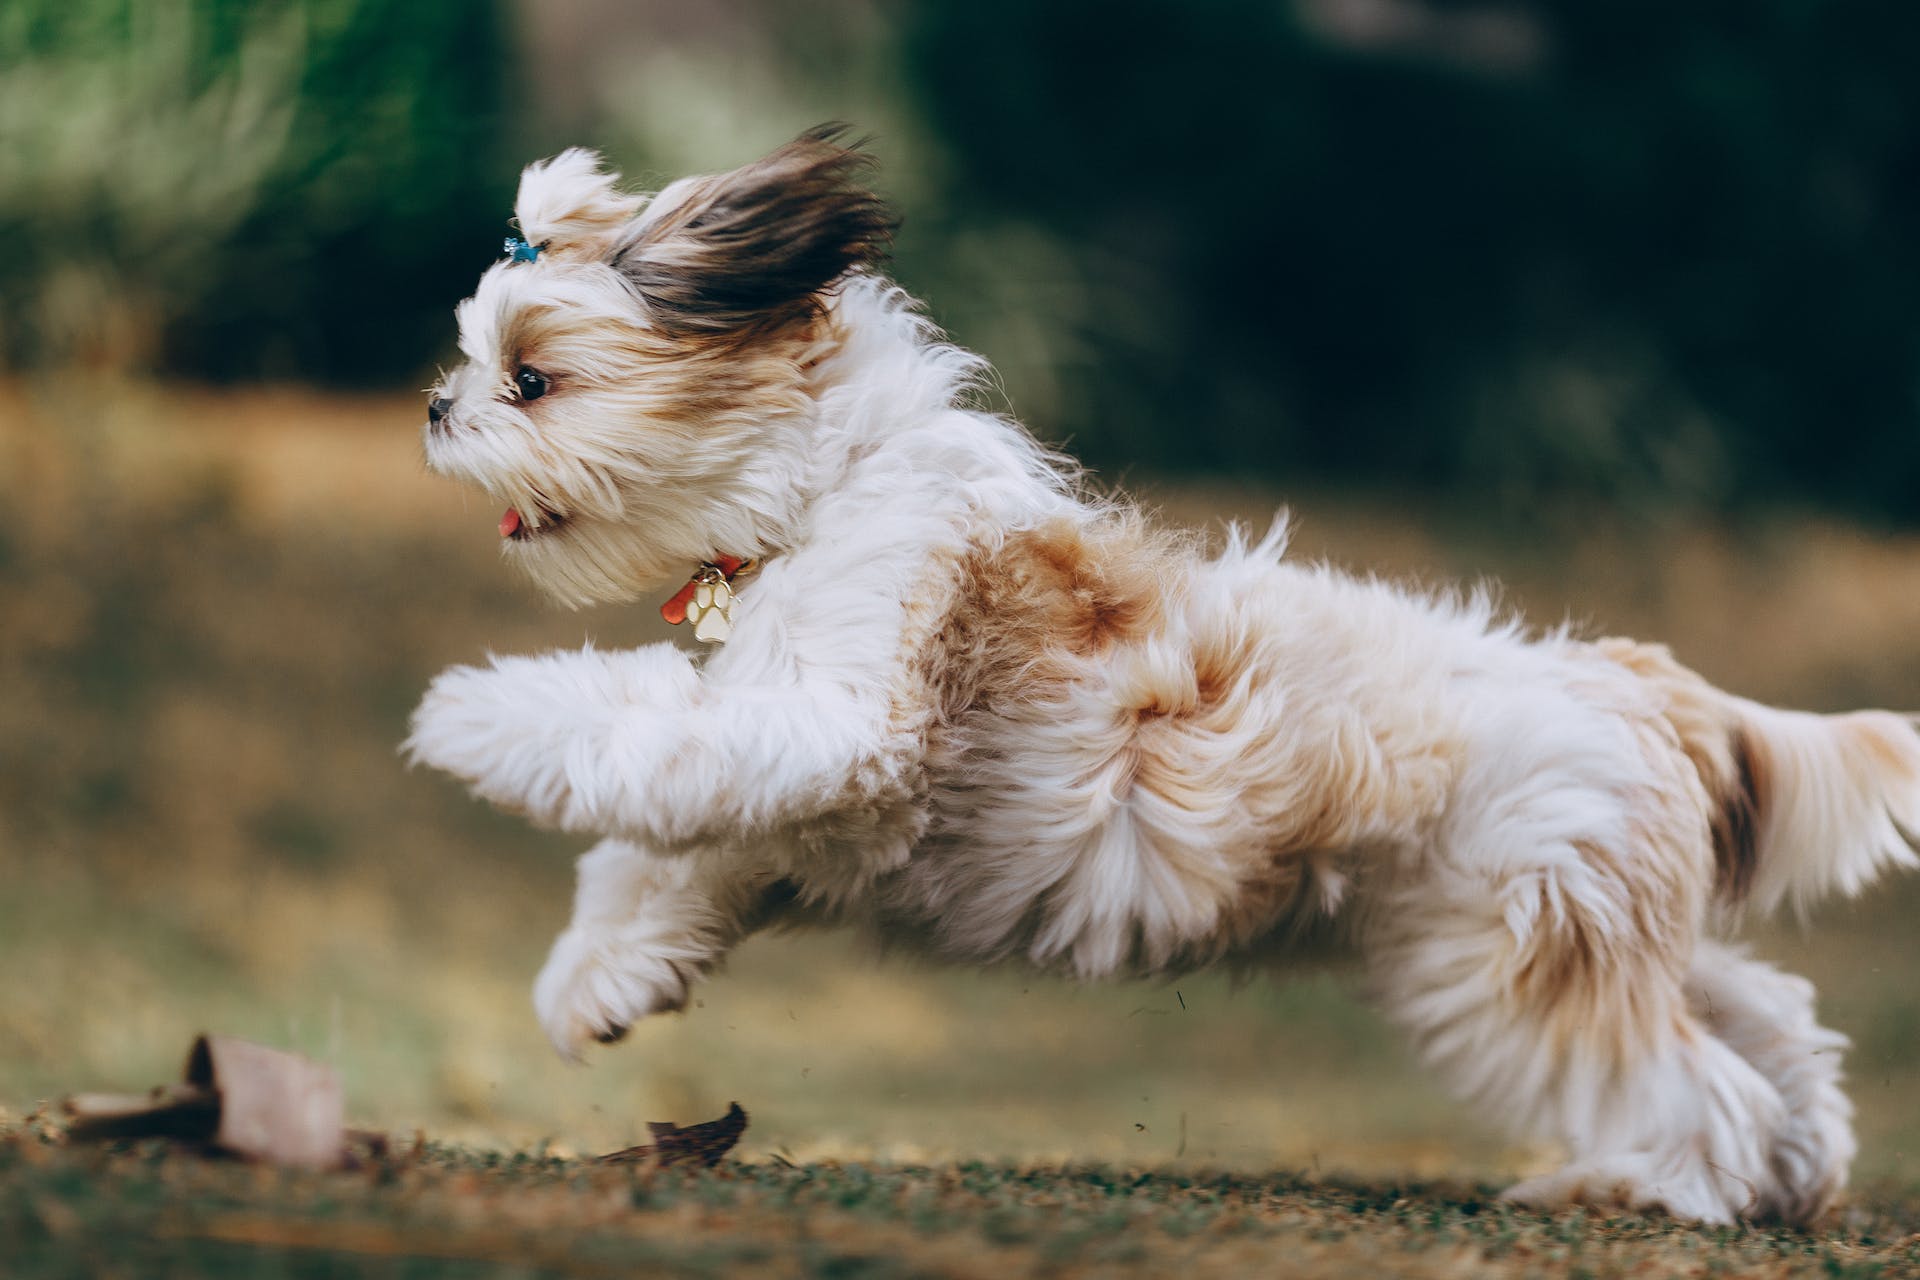 A small white dog running outdoors